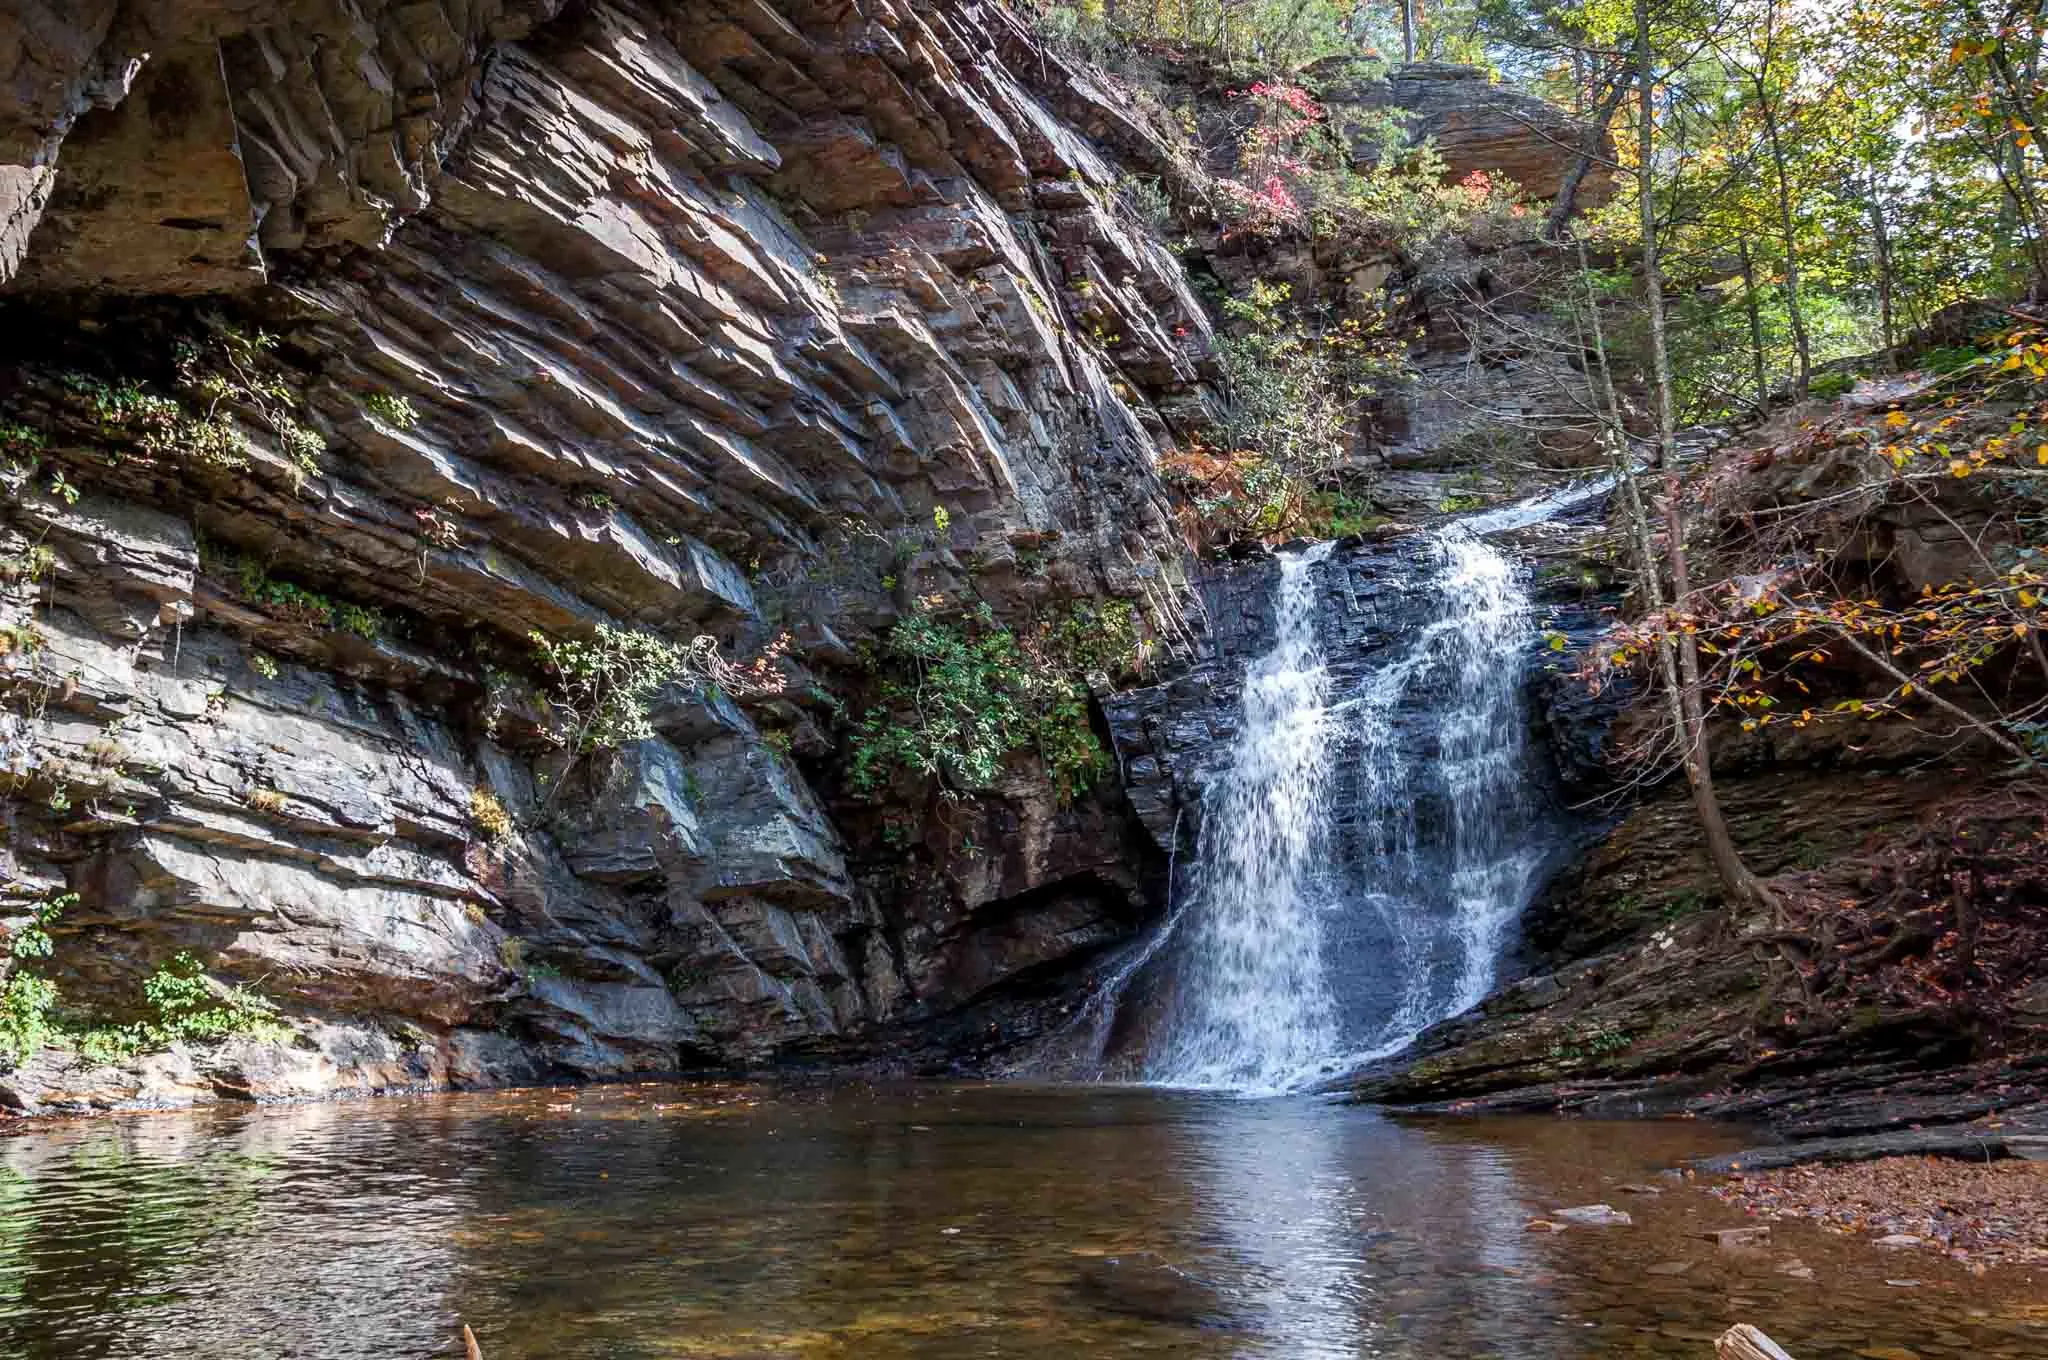 Waterfall surrounded by fall foliage in Hanging Rock State Park